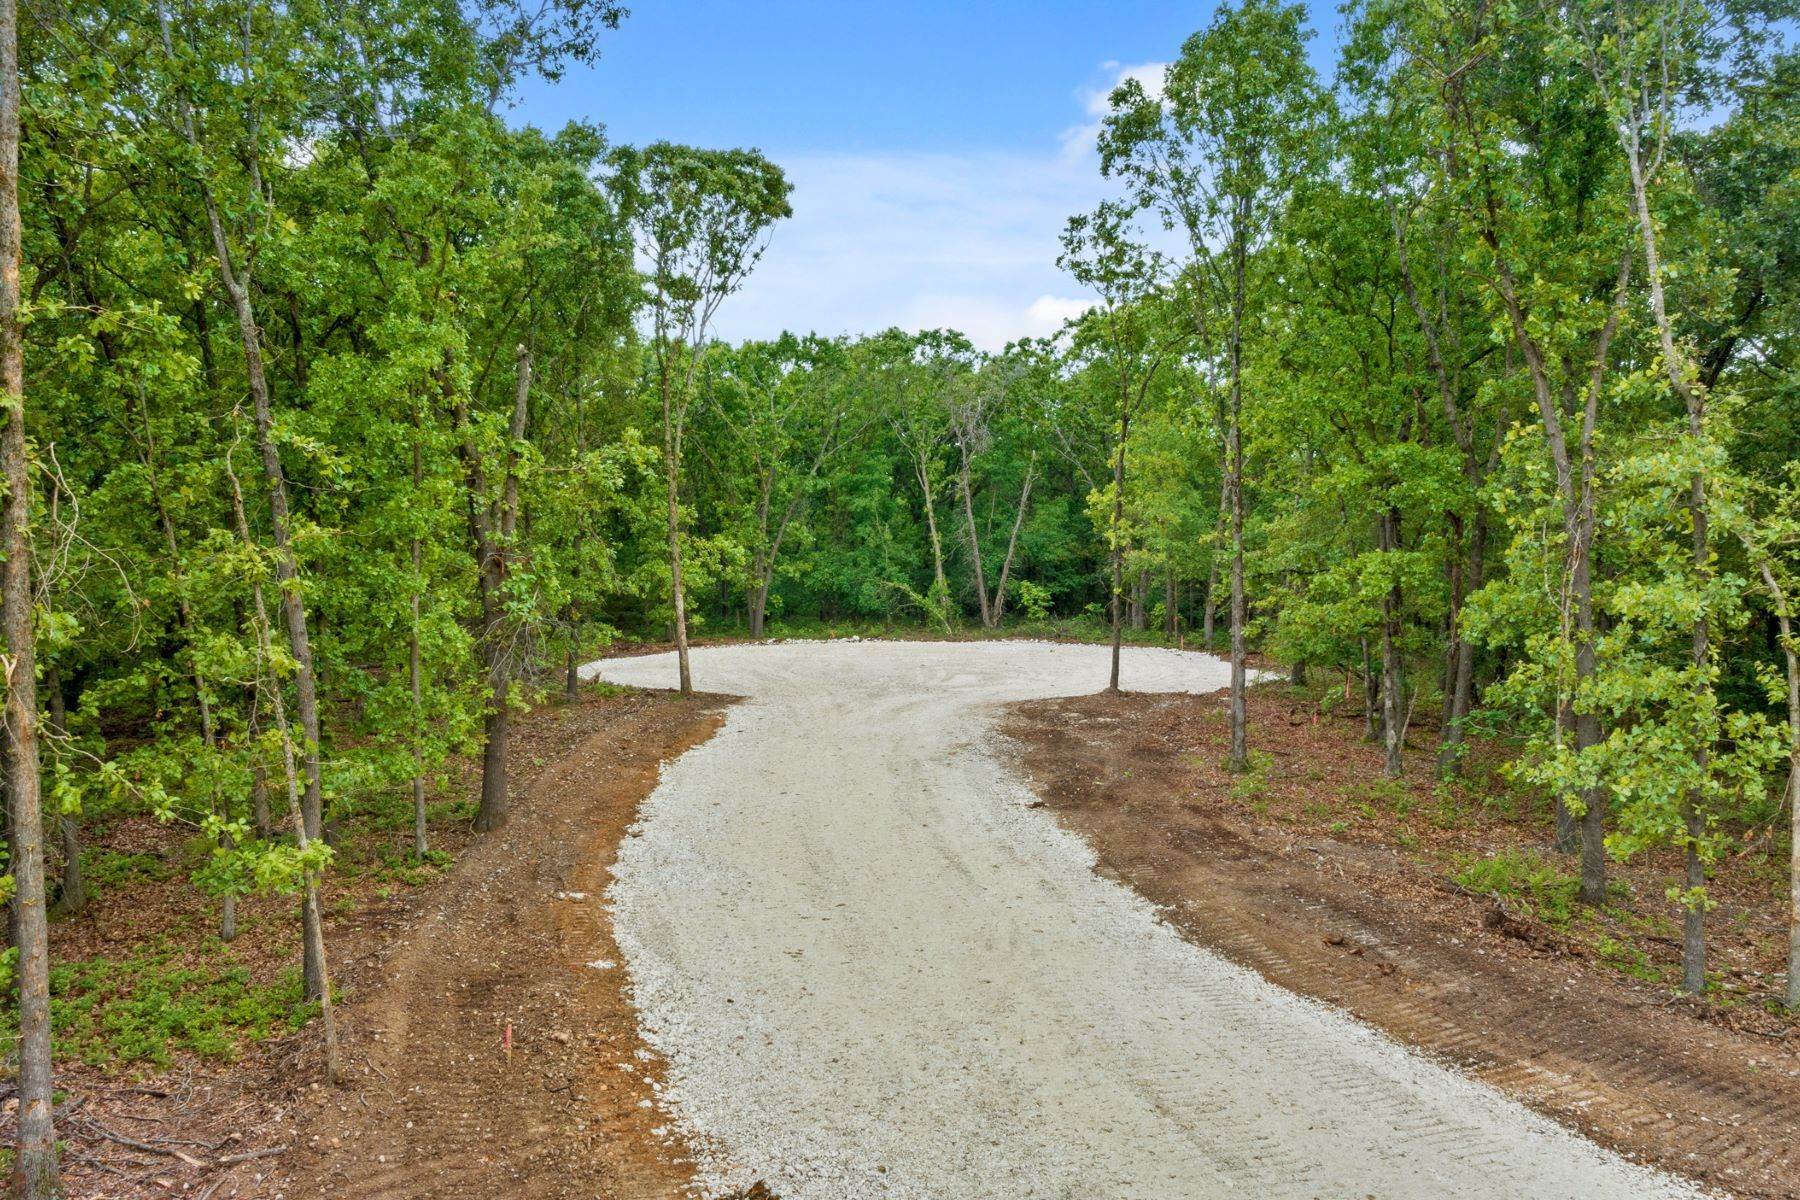 6. Land for Sale at 8113 Hill Country Dr., Decatur, AR 72722 8113 Hill Country Dr. Decatur, Arkansas 72722 United States